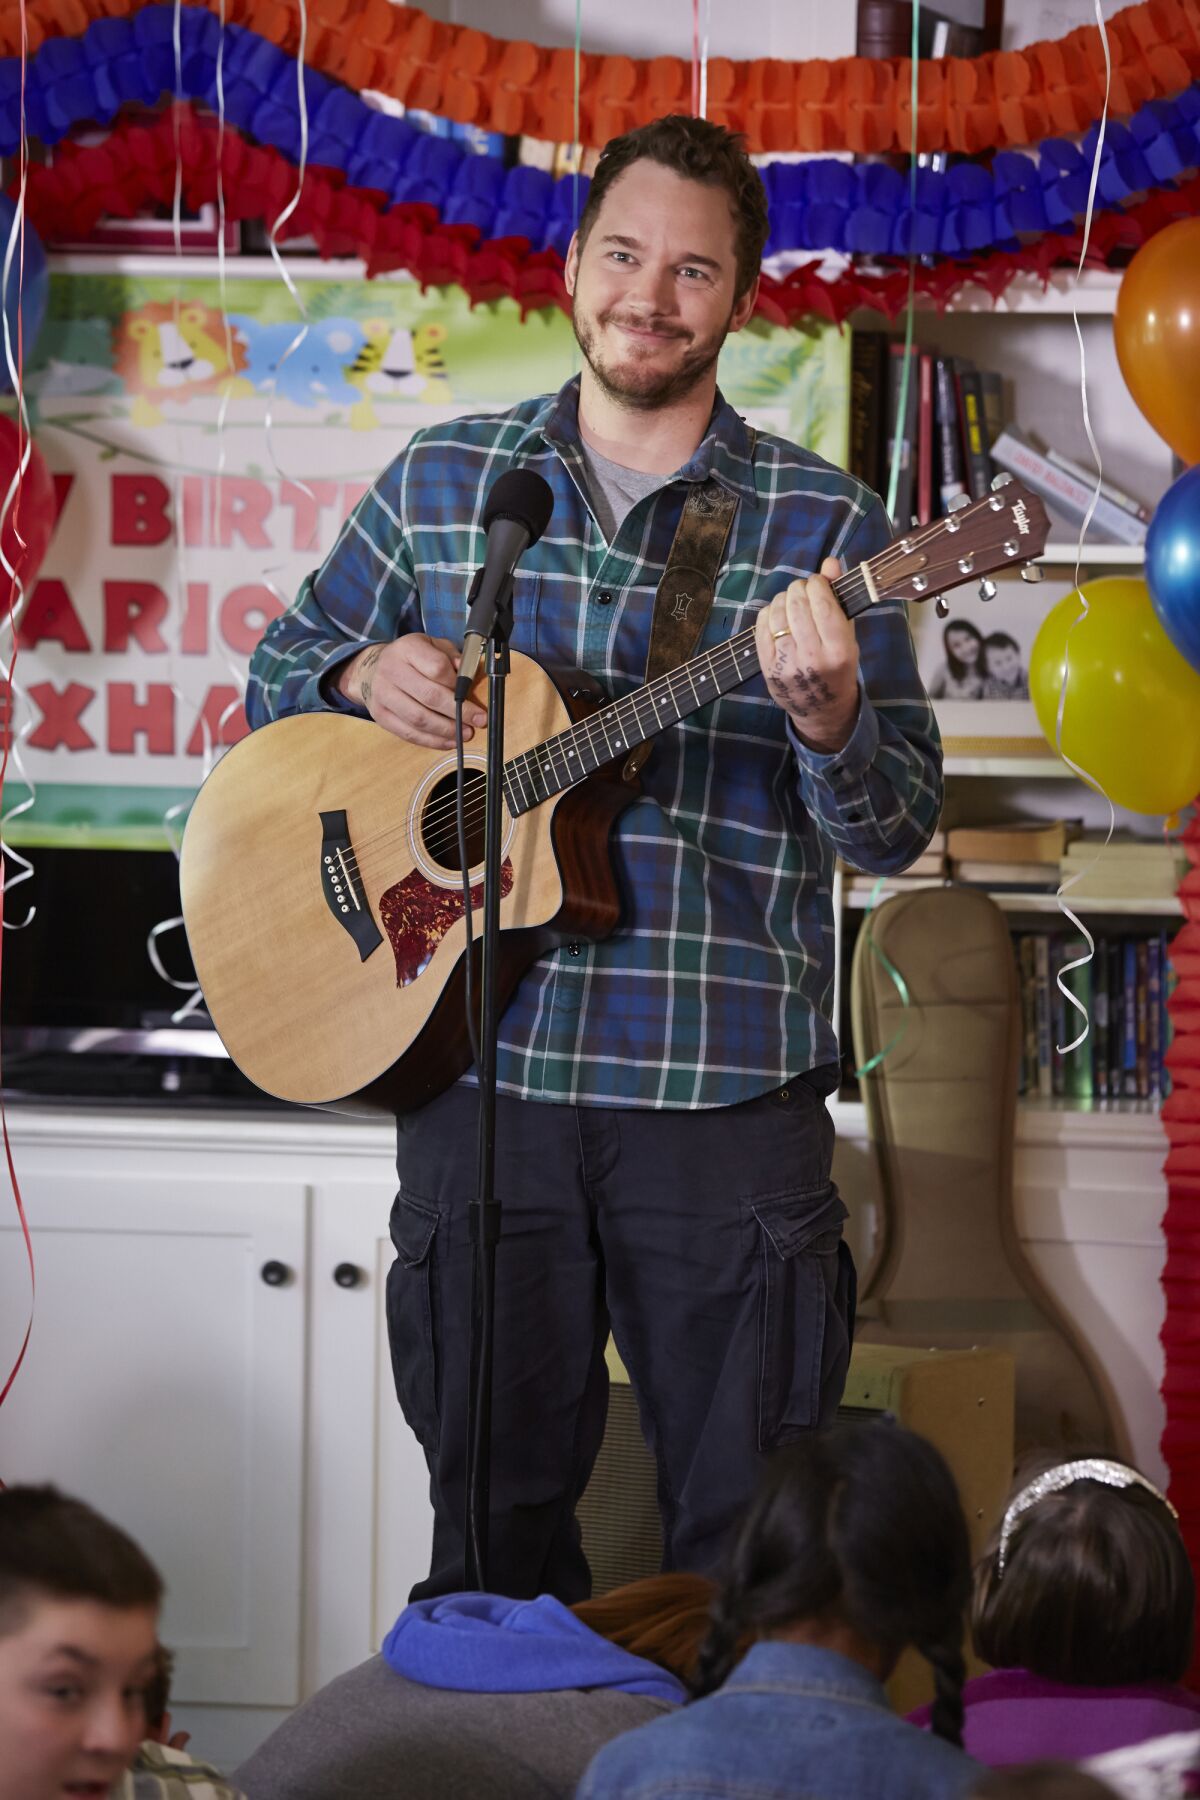 Chris Pratt holds a guitar behind a microphone in front of a birthday banner, with children seated on the ground.